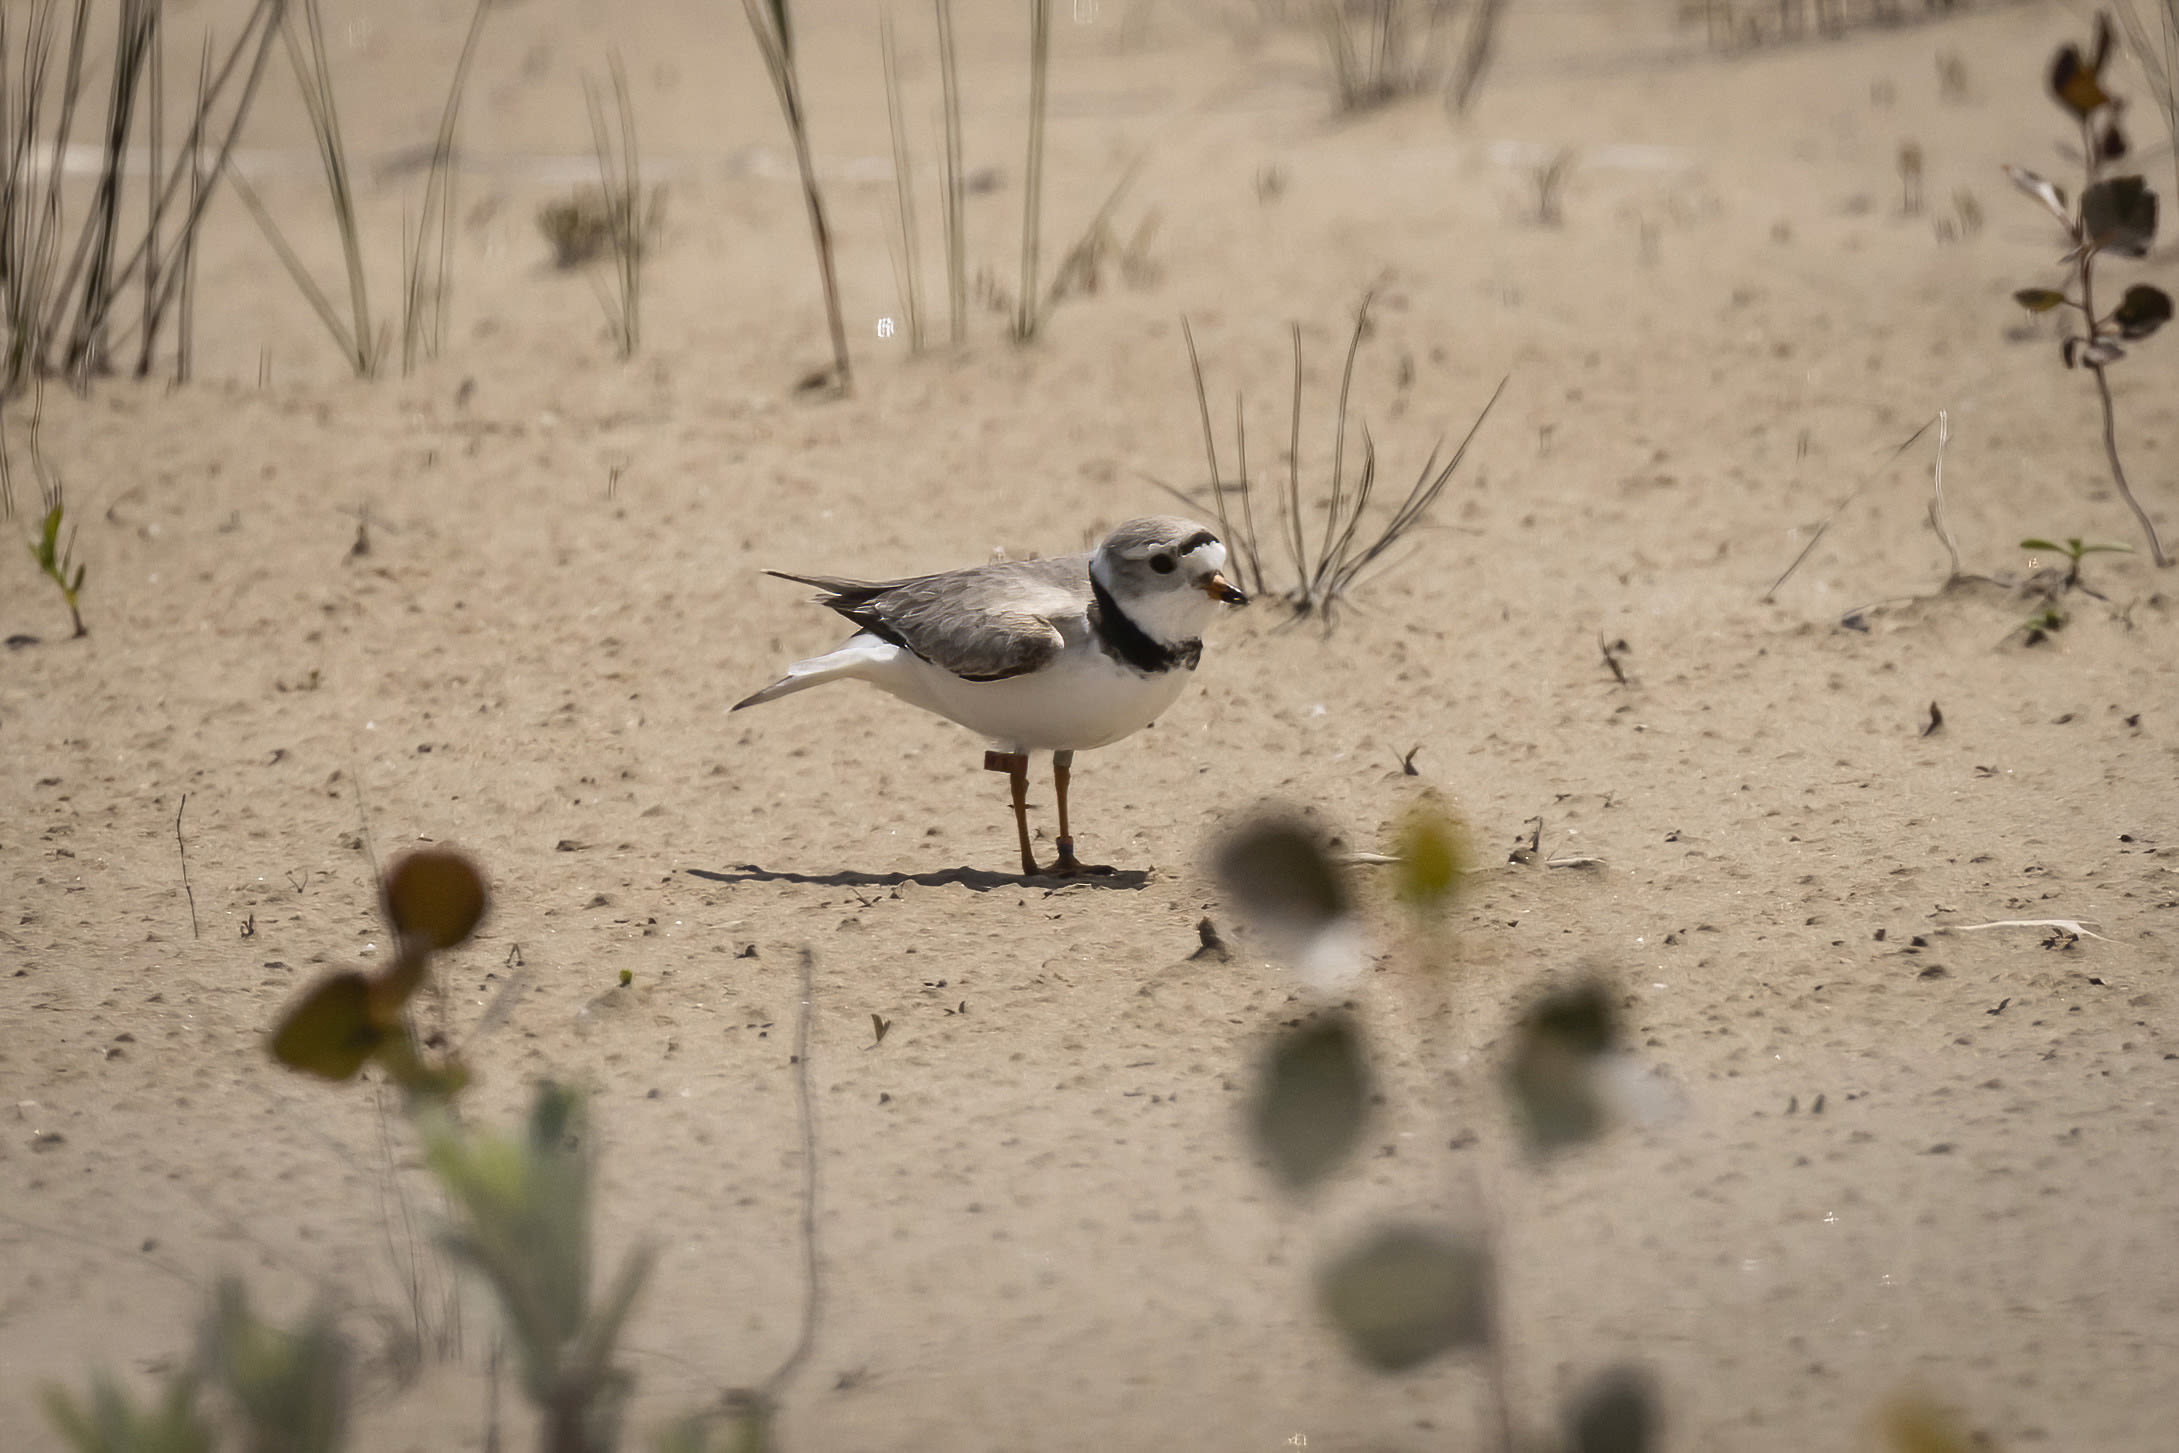 Could pair of plovers become lovebirds at Montrose Beach?